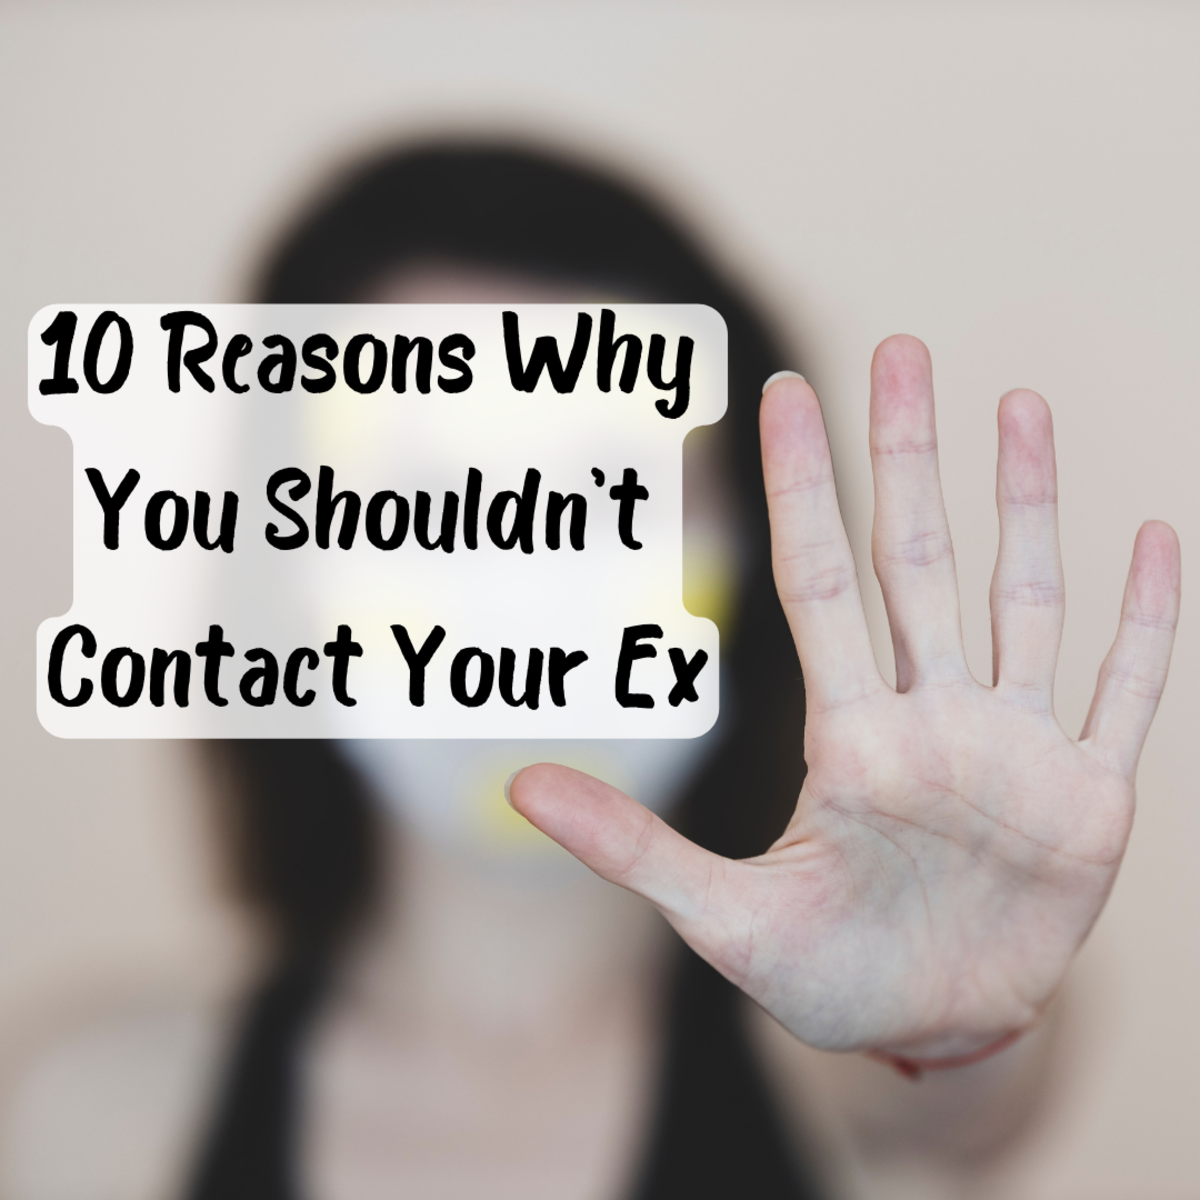 Learn 10 of the most important reasons why you should not contact your ex.